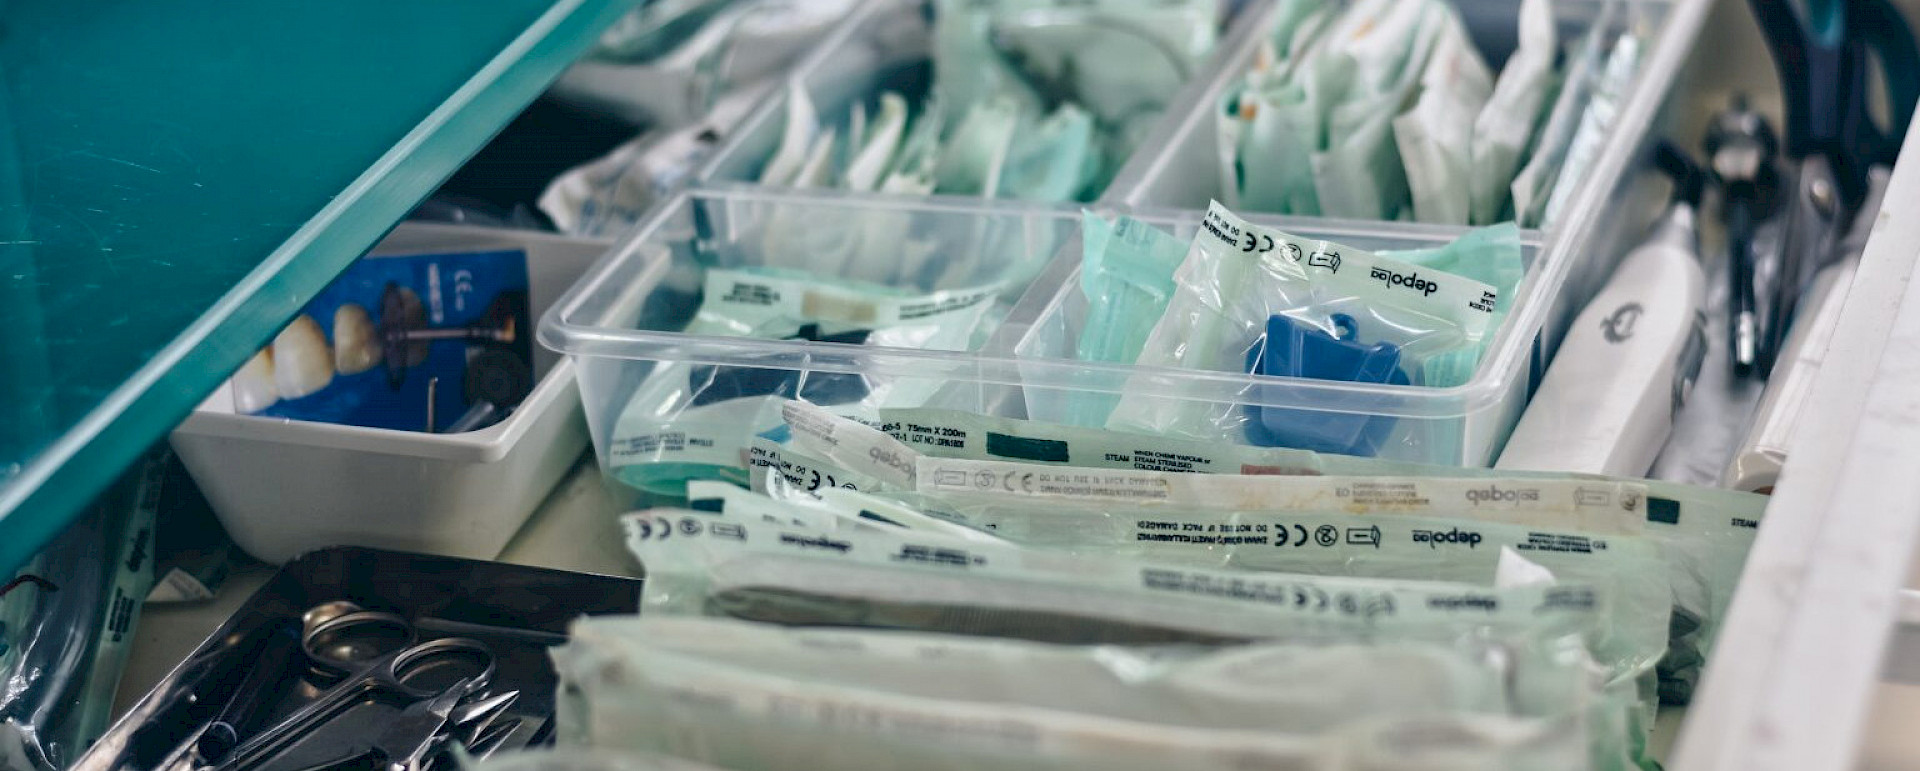 Sterile medical devices in a drawer